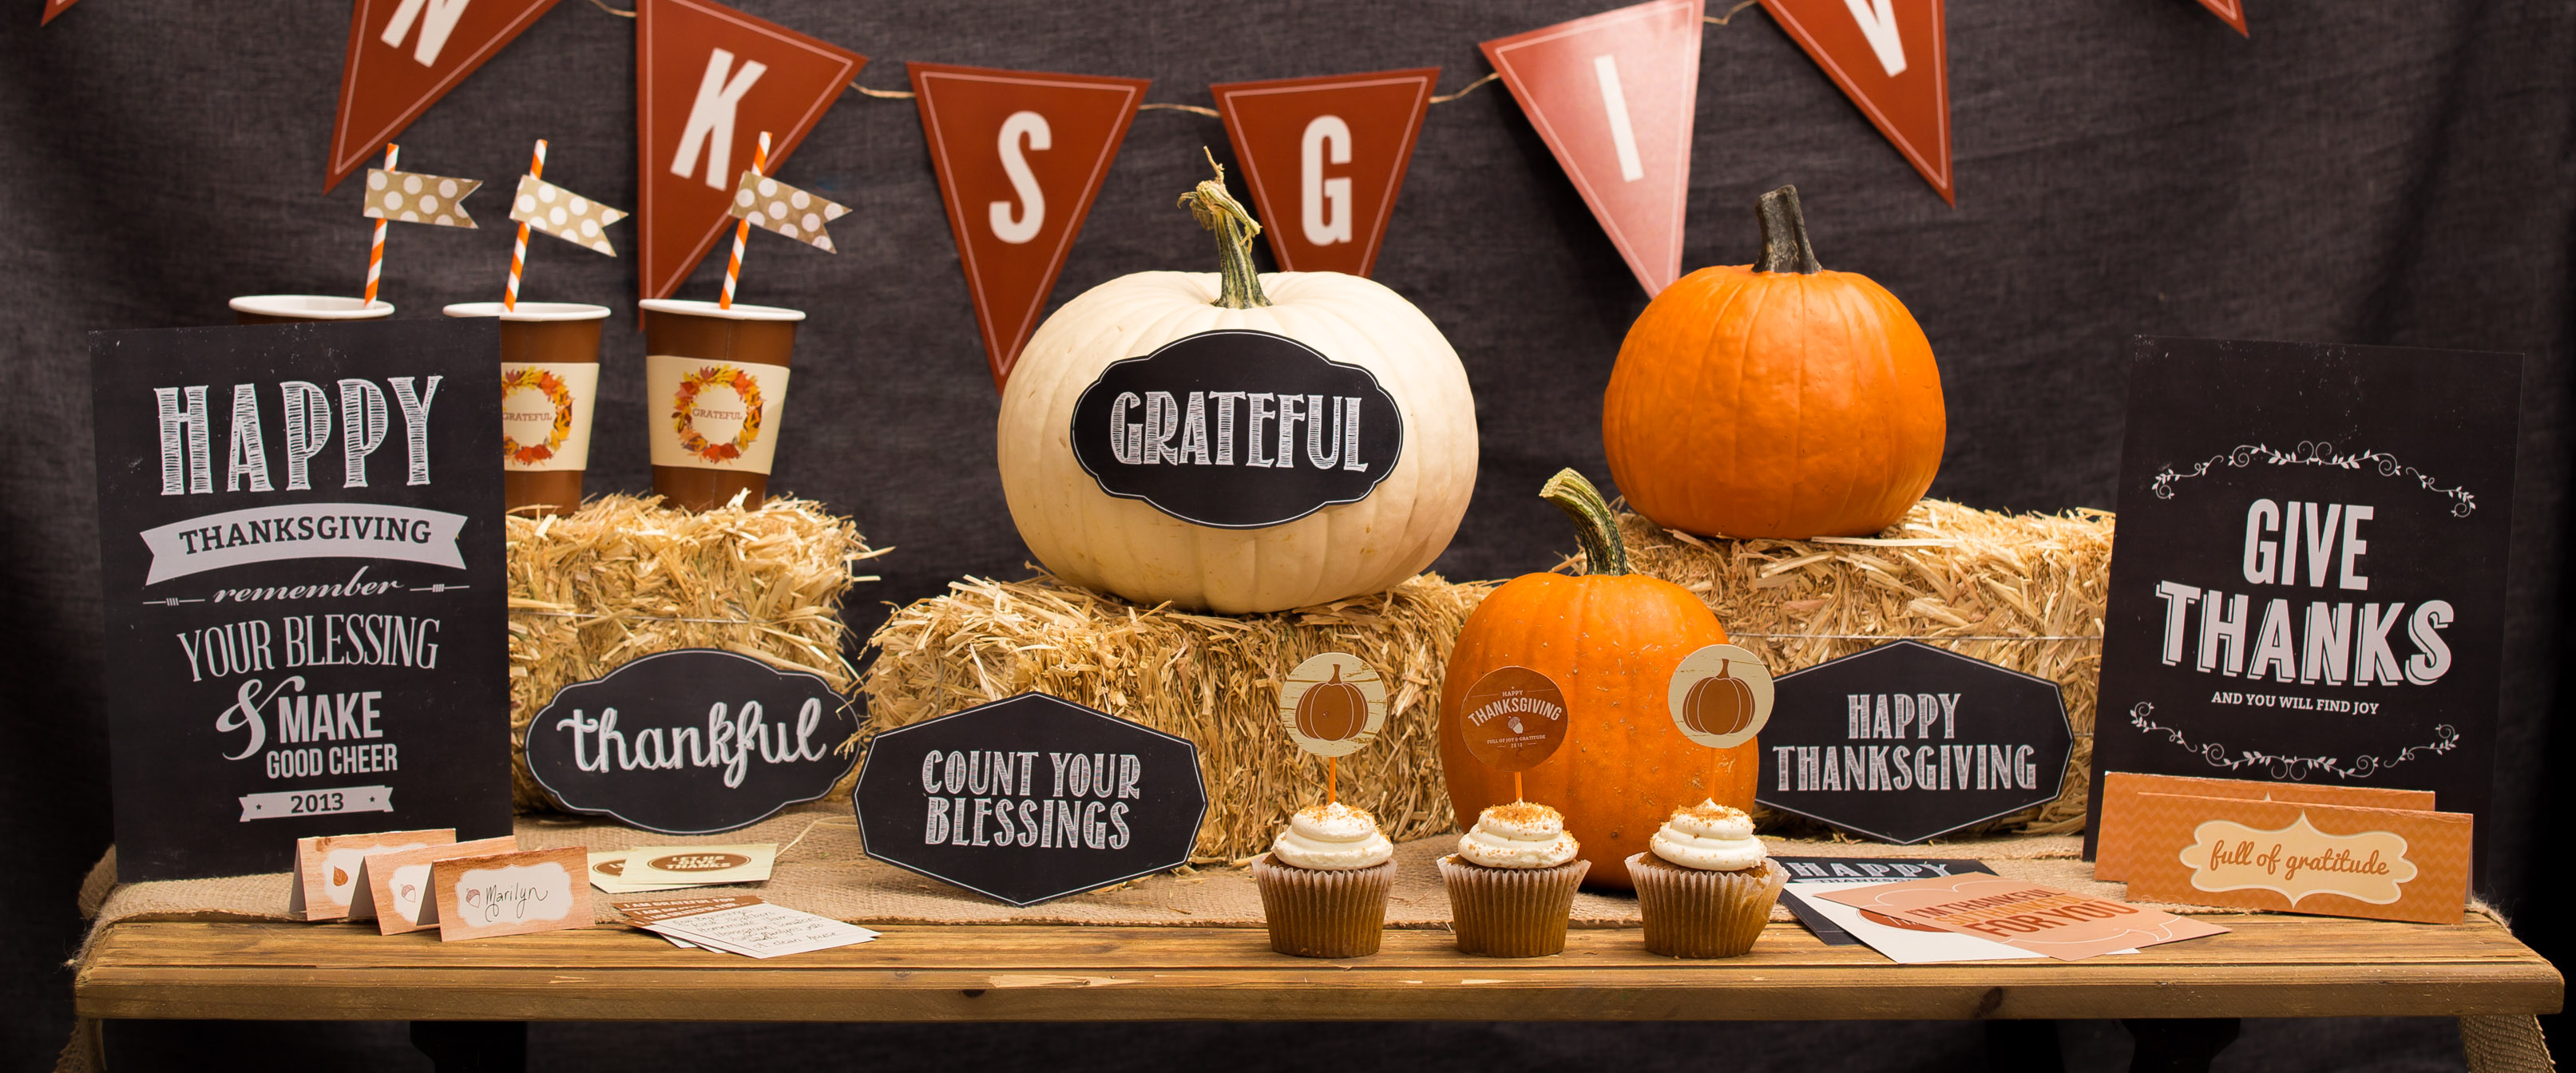 holiday, thanksgiving, message, pumpkin for android